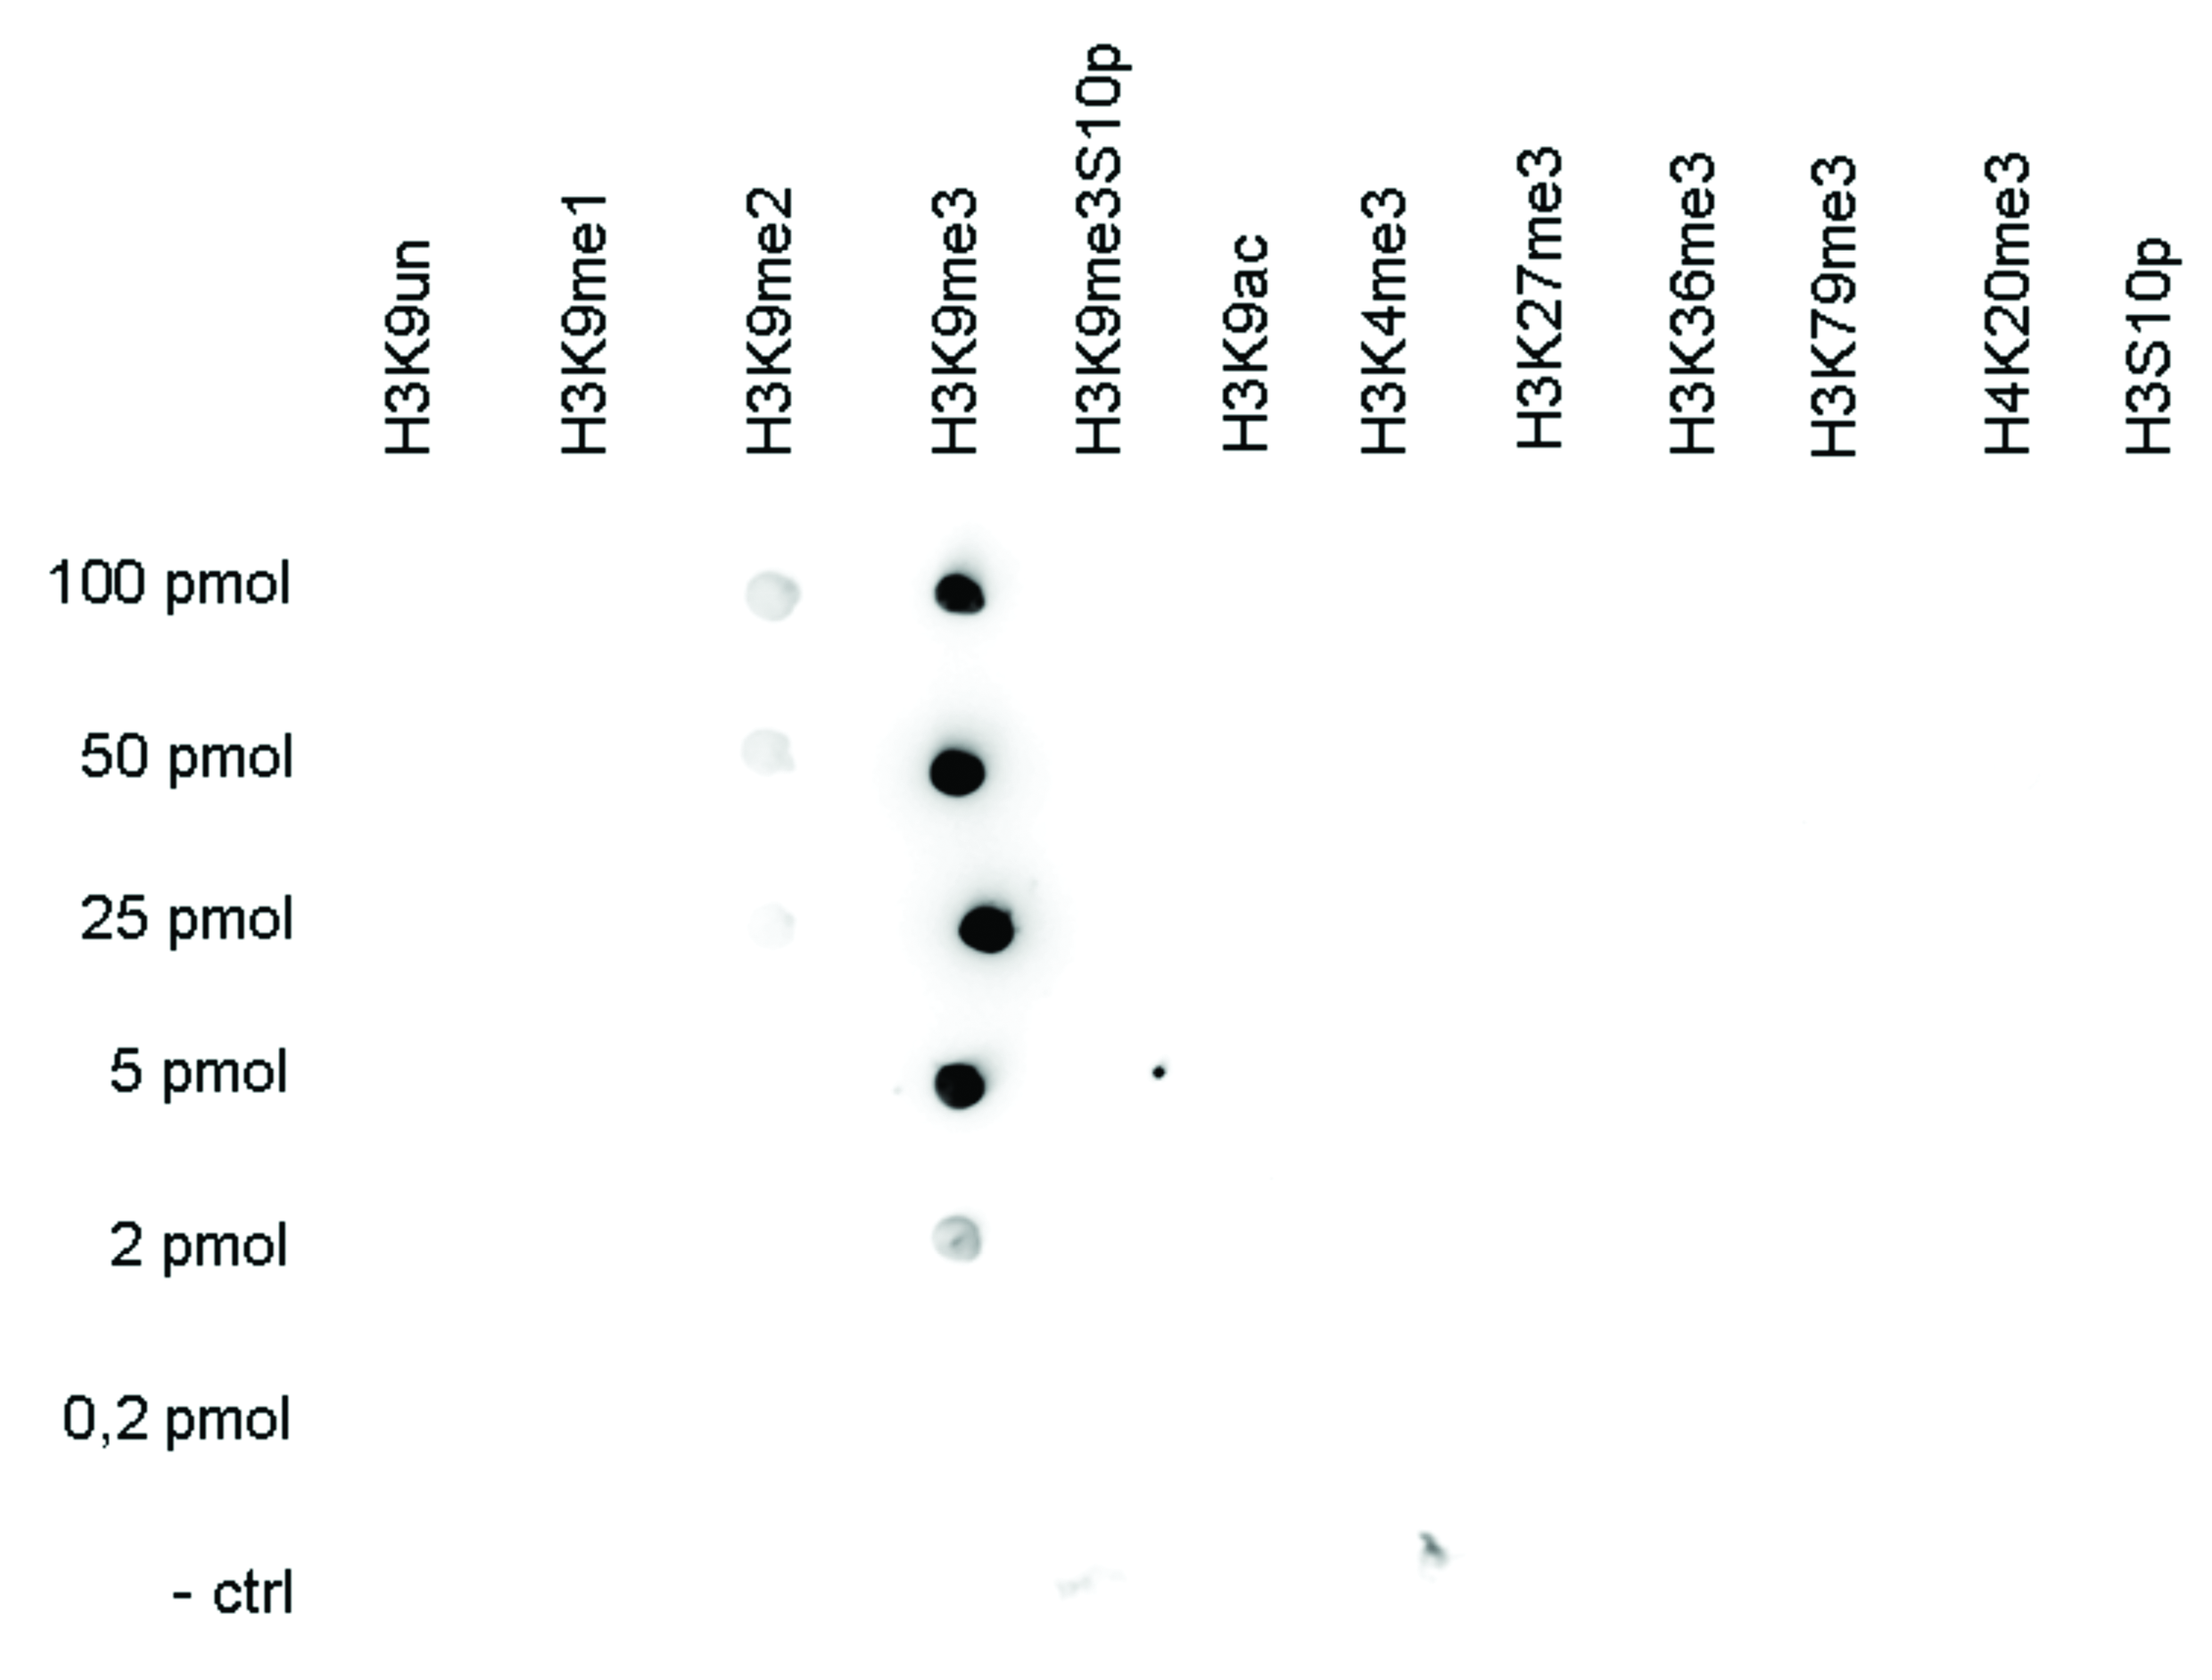 A Dot Blot analysis was performed to test the cross-reactivity of the antibody against H3K9me3 (Cat. No. bs-53114R) with peptides containing other modifications and unmodified sequences of histone H3 and H4. One hundred to 0.2 pmol of the peptide containing the respective histone modification were spotted on a membrane. The antibody was used at a dilution of 1:20,000. The figure shows a high specificity of the antibody for the modification of interest.